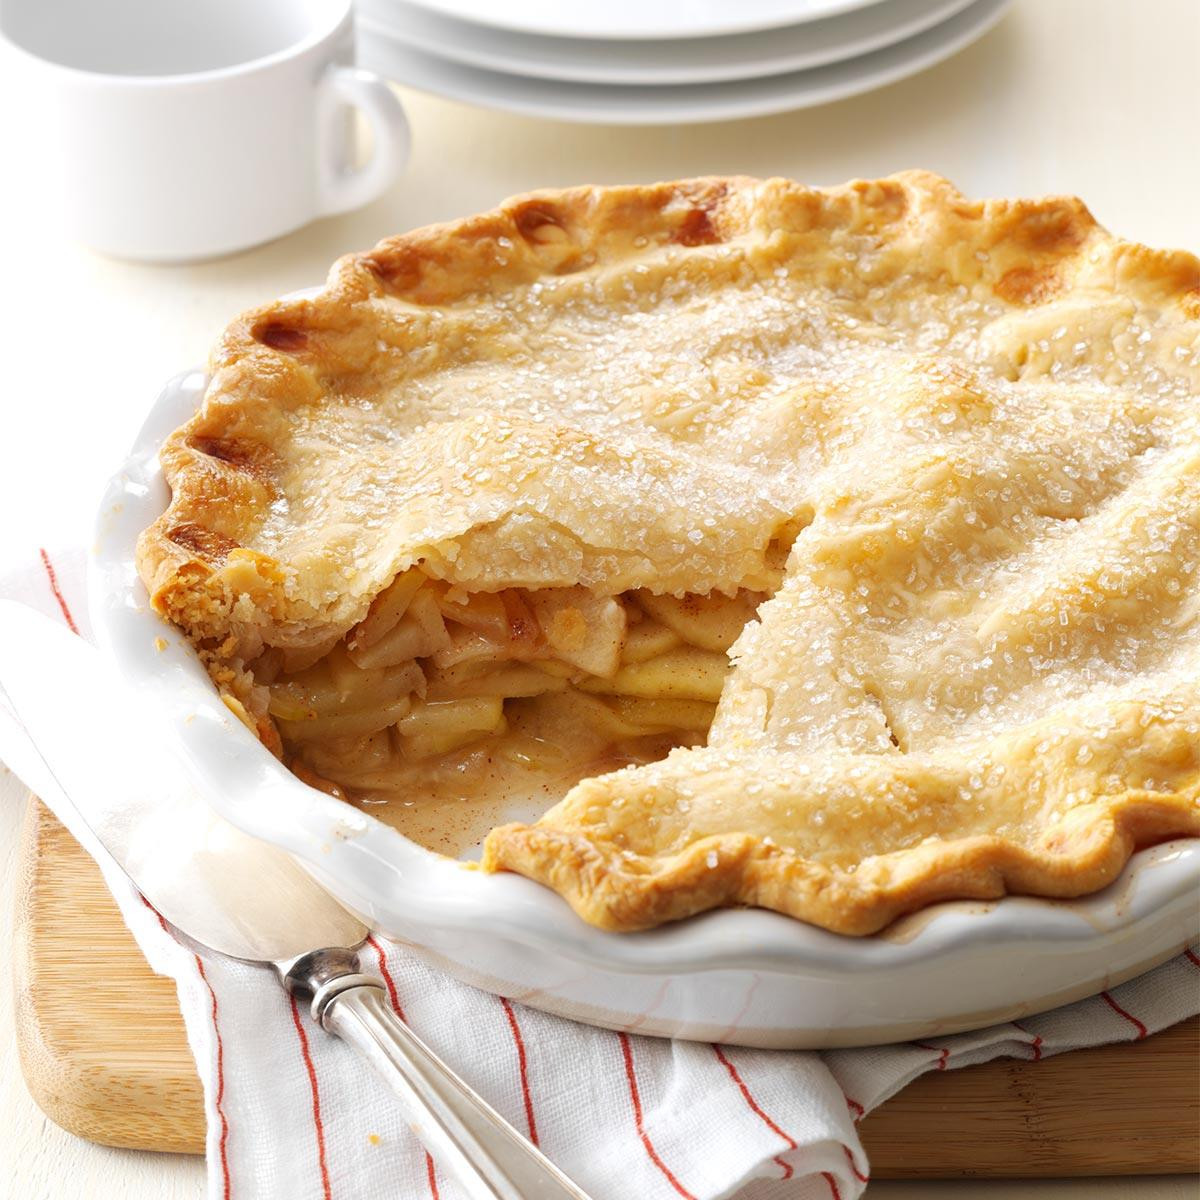 How To Make An Apple Pie
 Classic American Pie Recipes